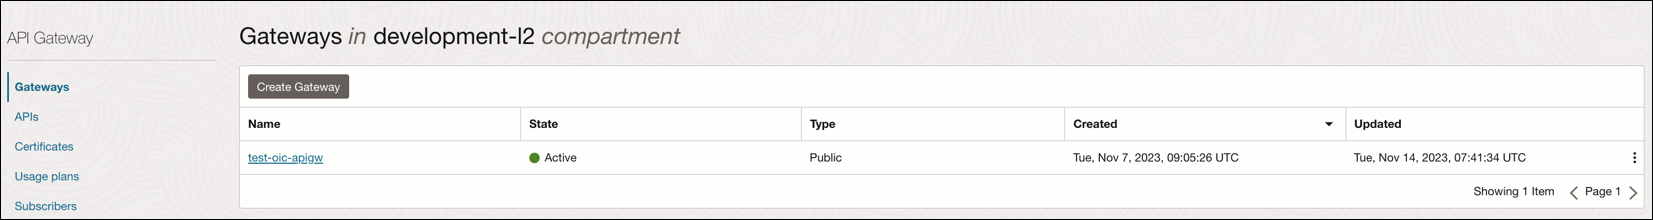 The Gateways page shows a table with columns with Name, State, Type, Created, and Updated. On the left are links for Gateways, APIs, Certificates, Usage plans, and Subscriptions.